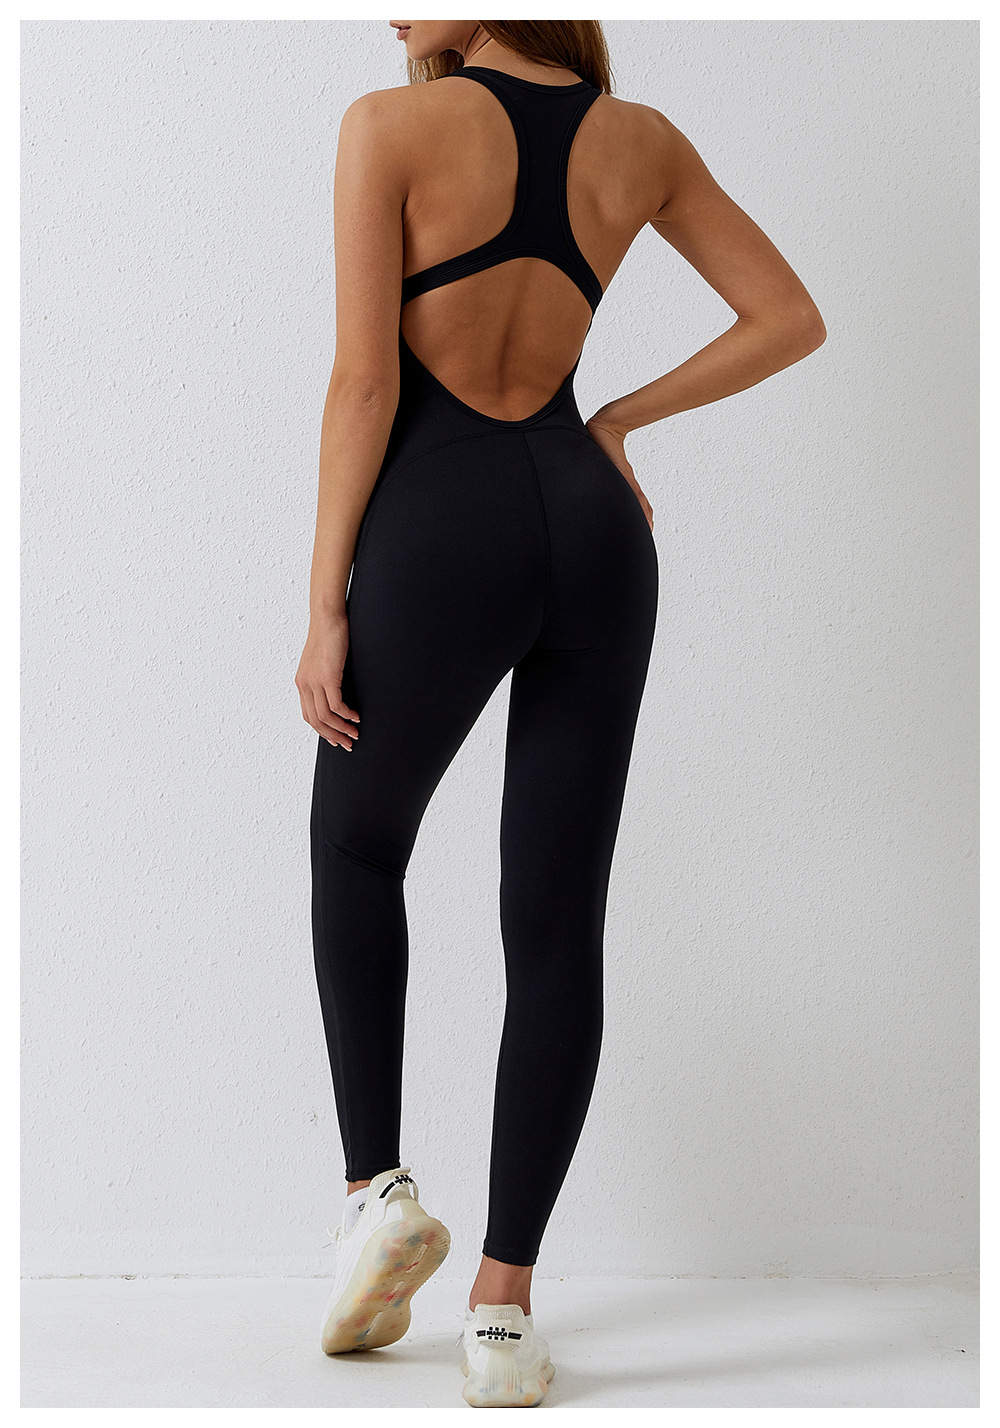 Bodied Bodysuit pants – Shred with Krys